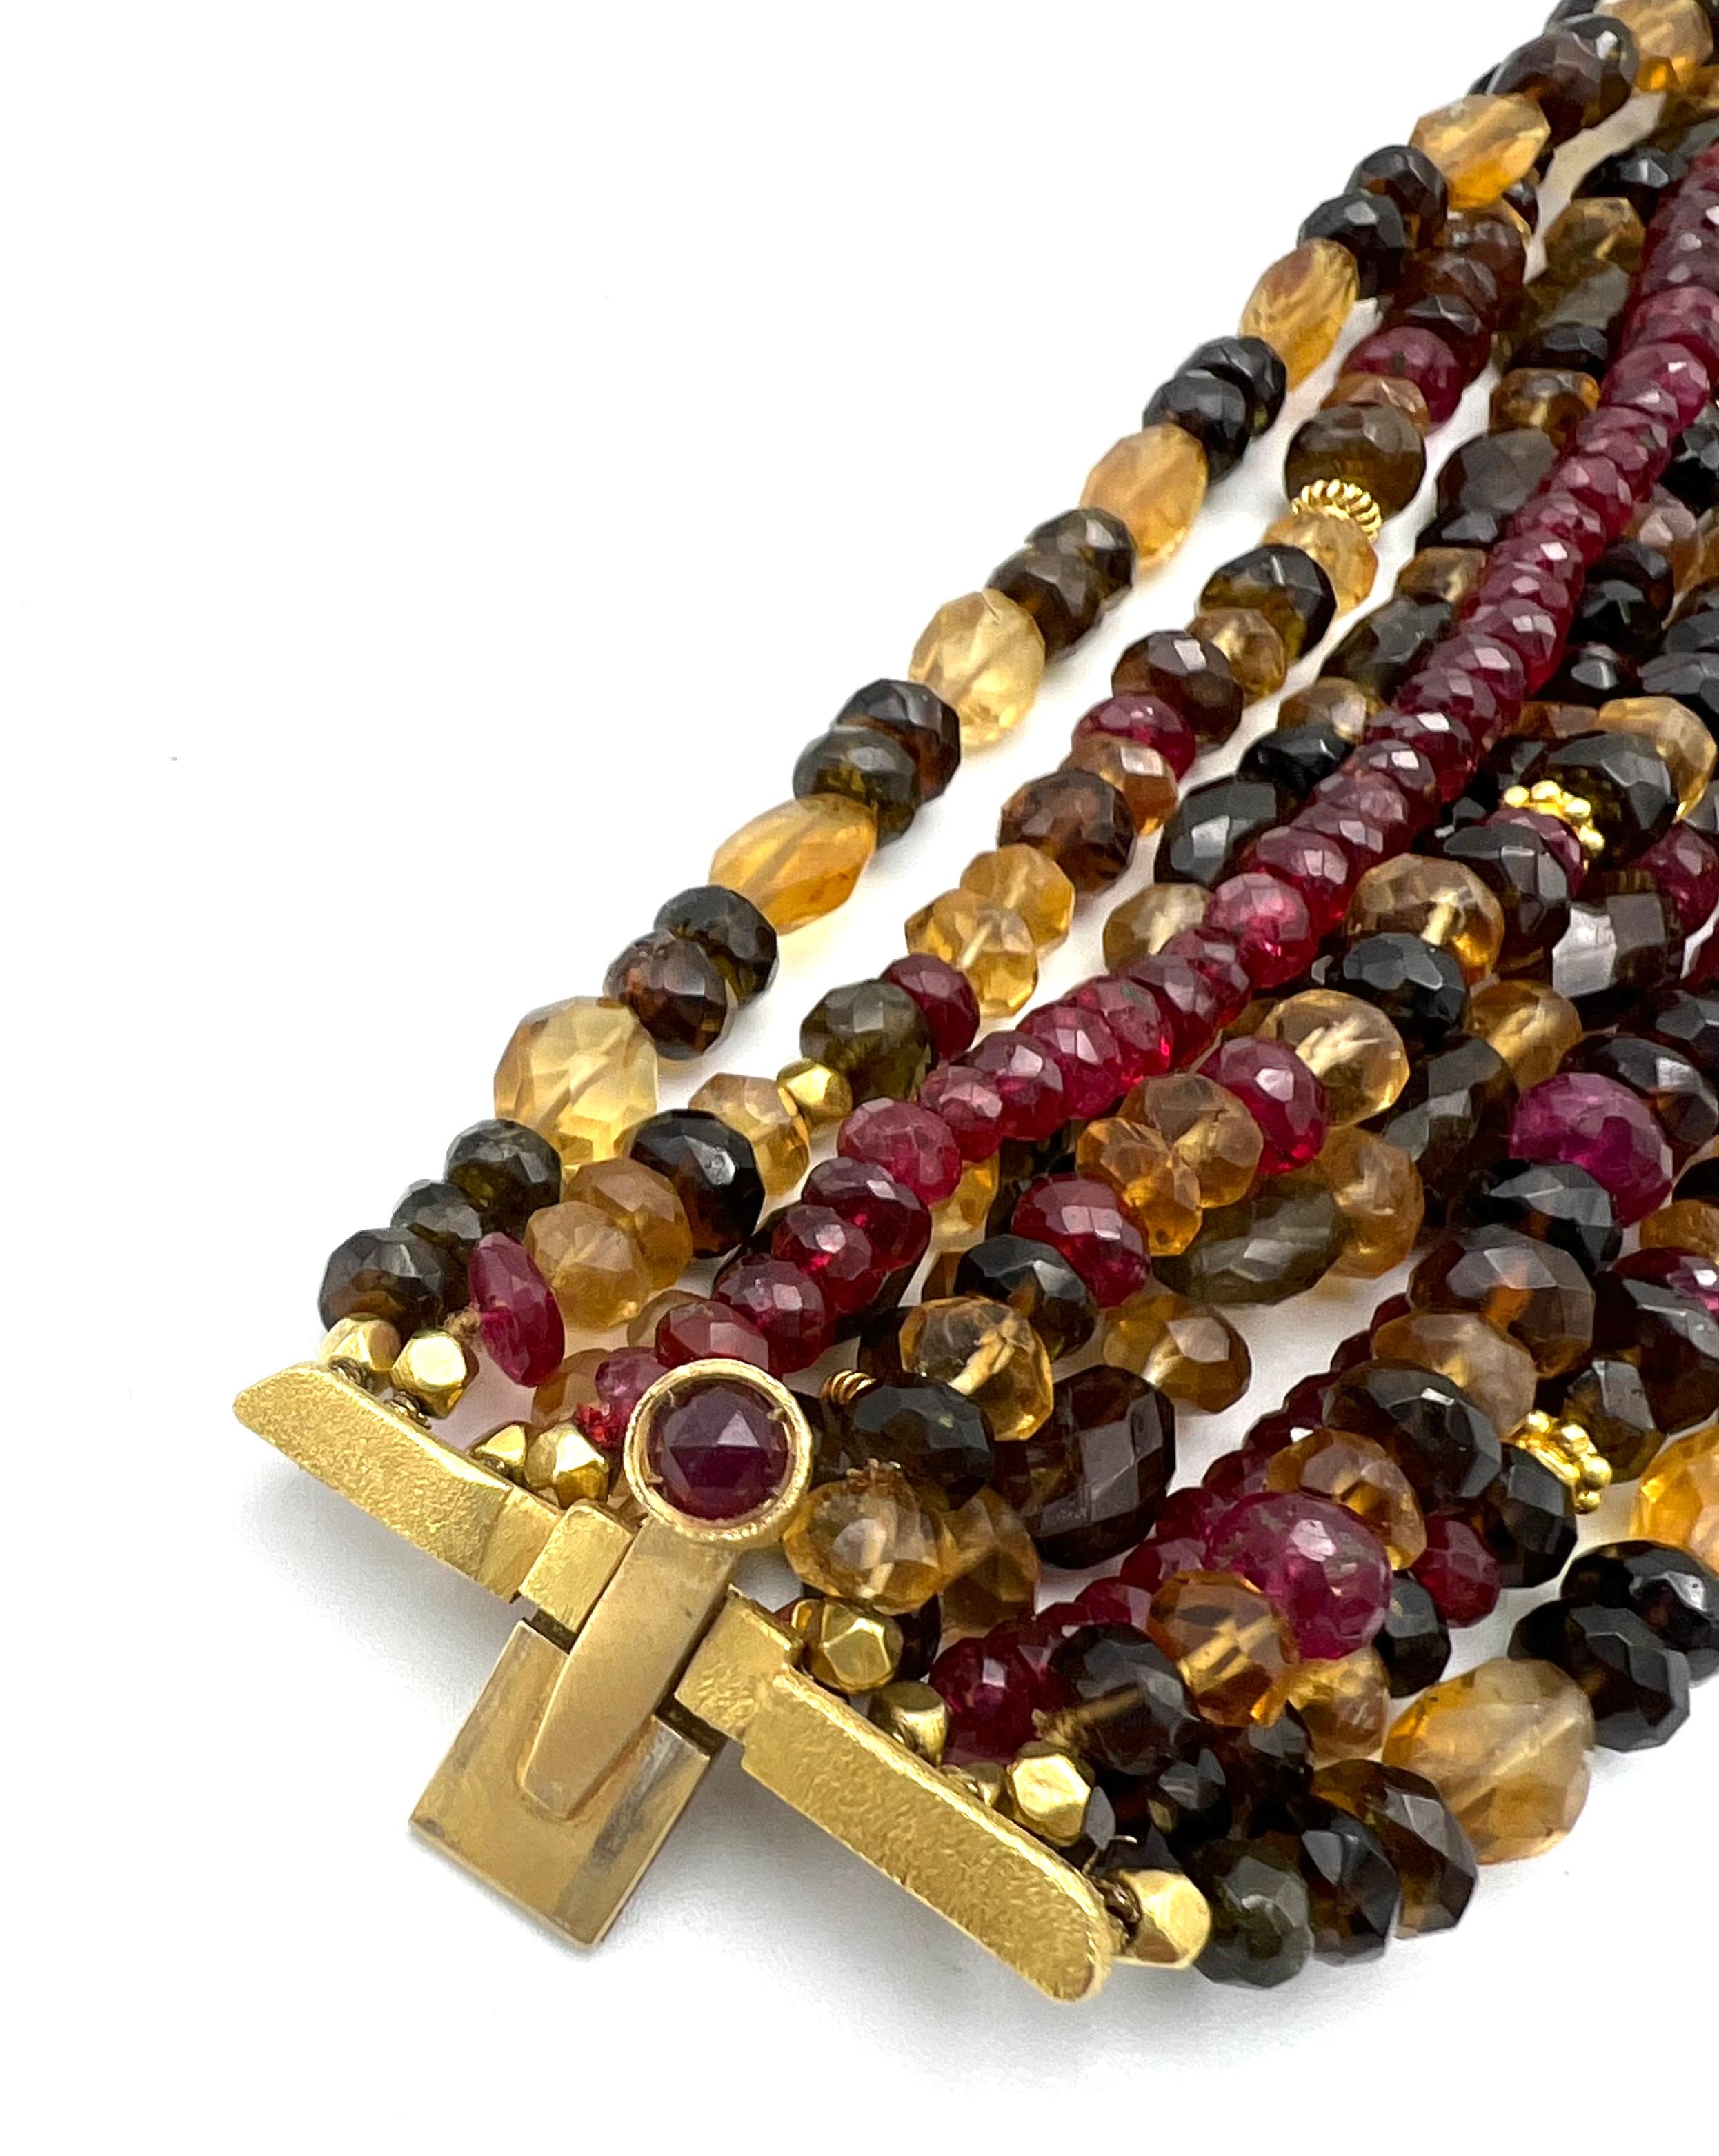 Paola Ferro Yellow Gold and Gemstone Bead Bracelet For Sale 1